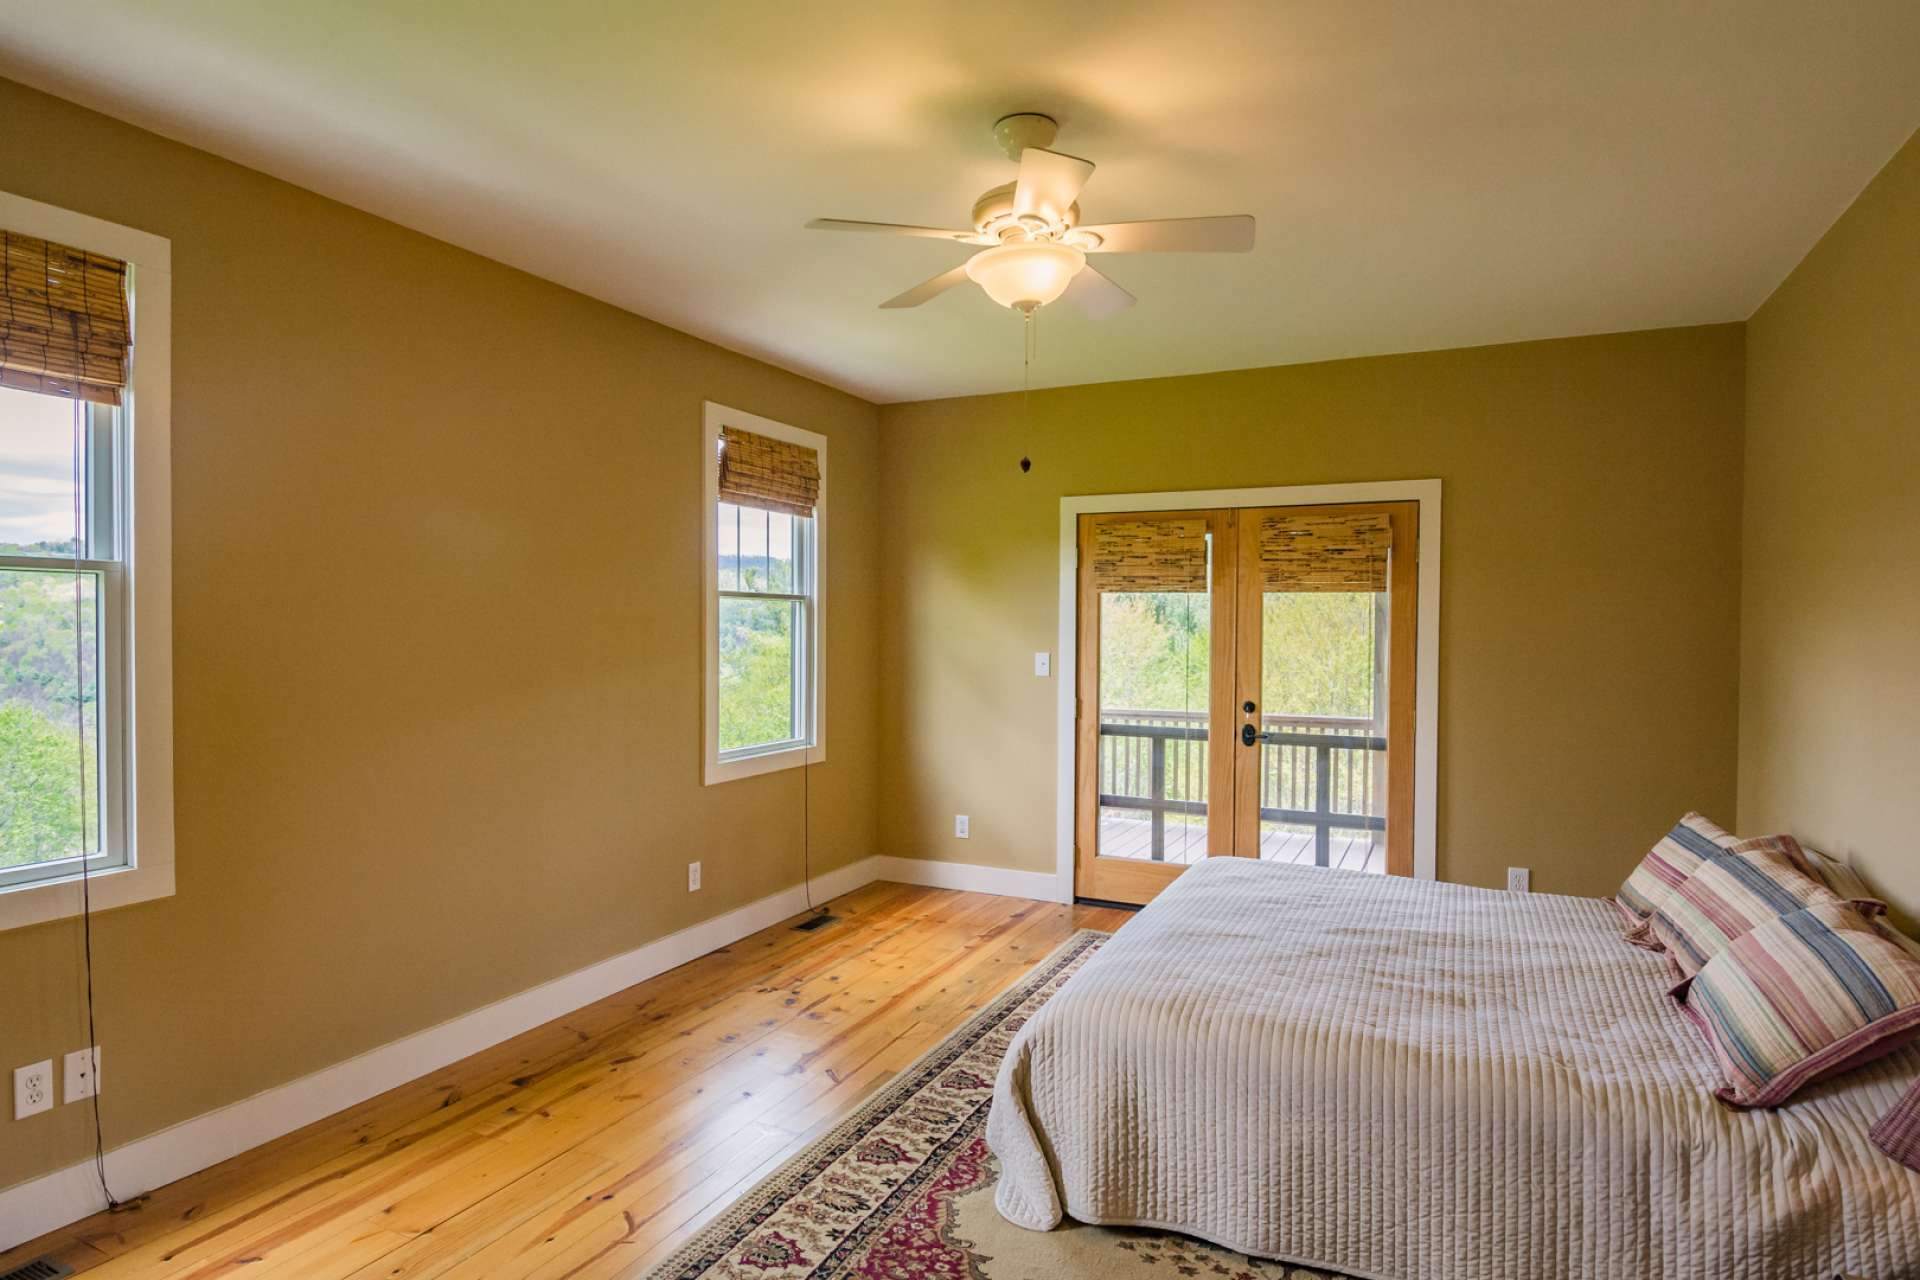 The main level offers a spacious master  bedroom with  walk-out access to the porch, and a shared bath.